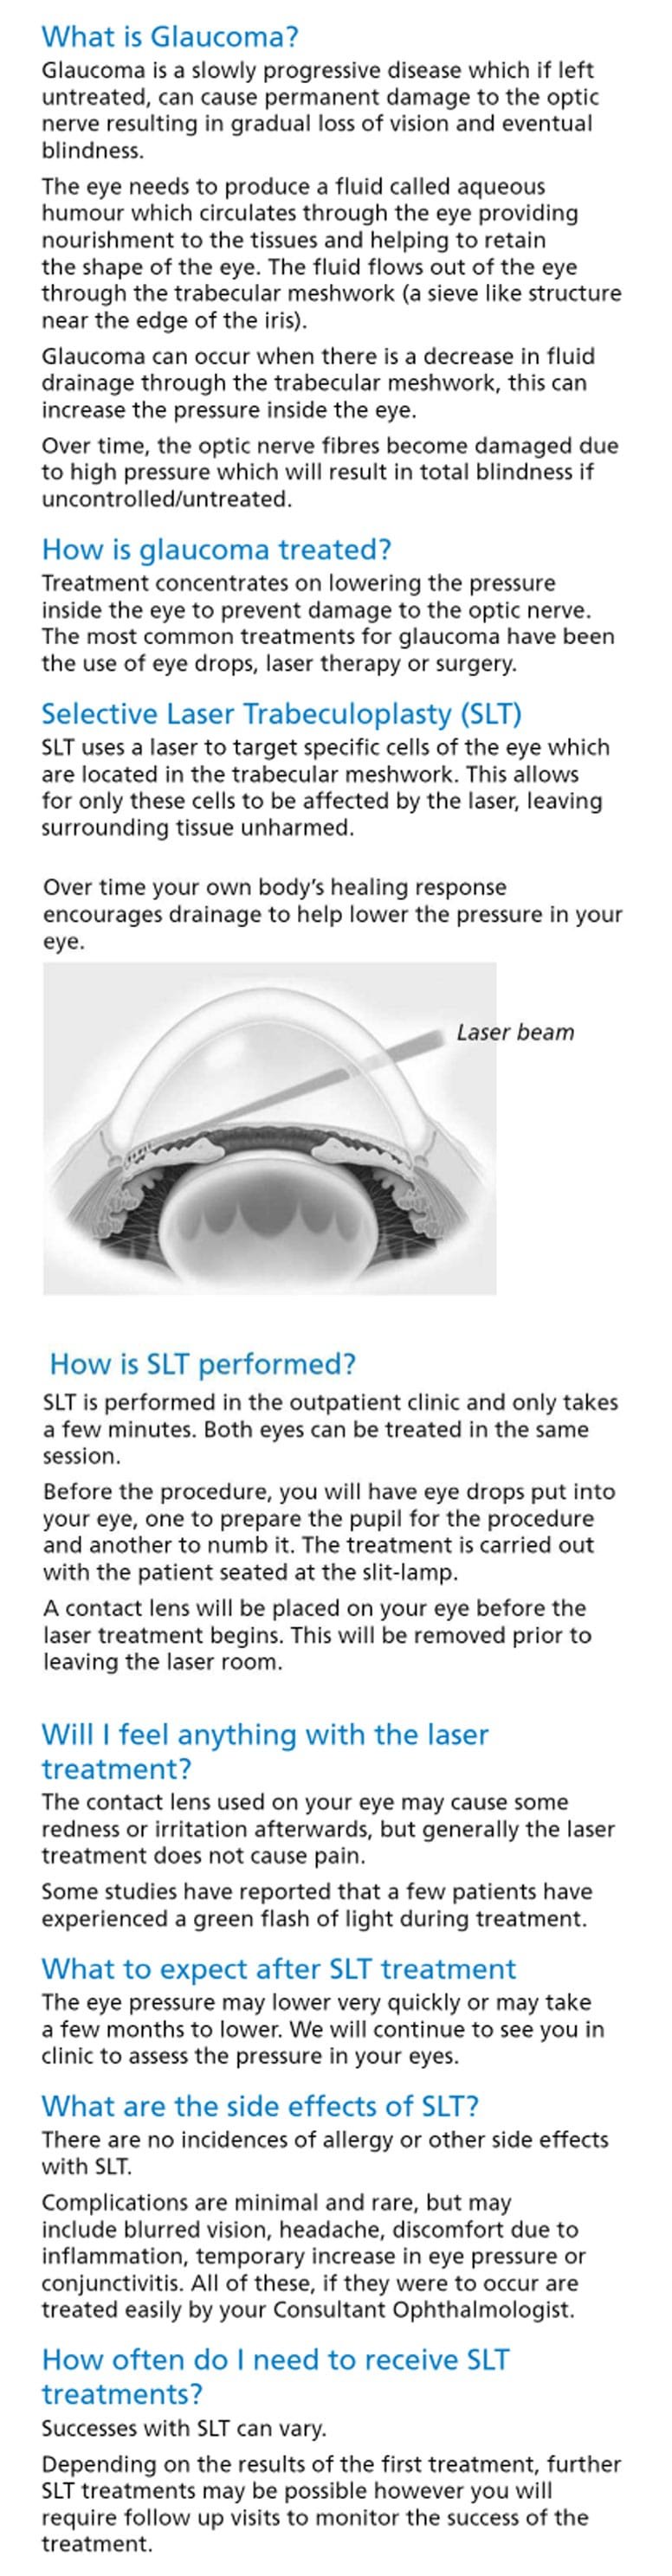 Glaucoma and Selective Laser Trabeculoplasty